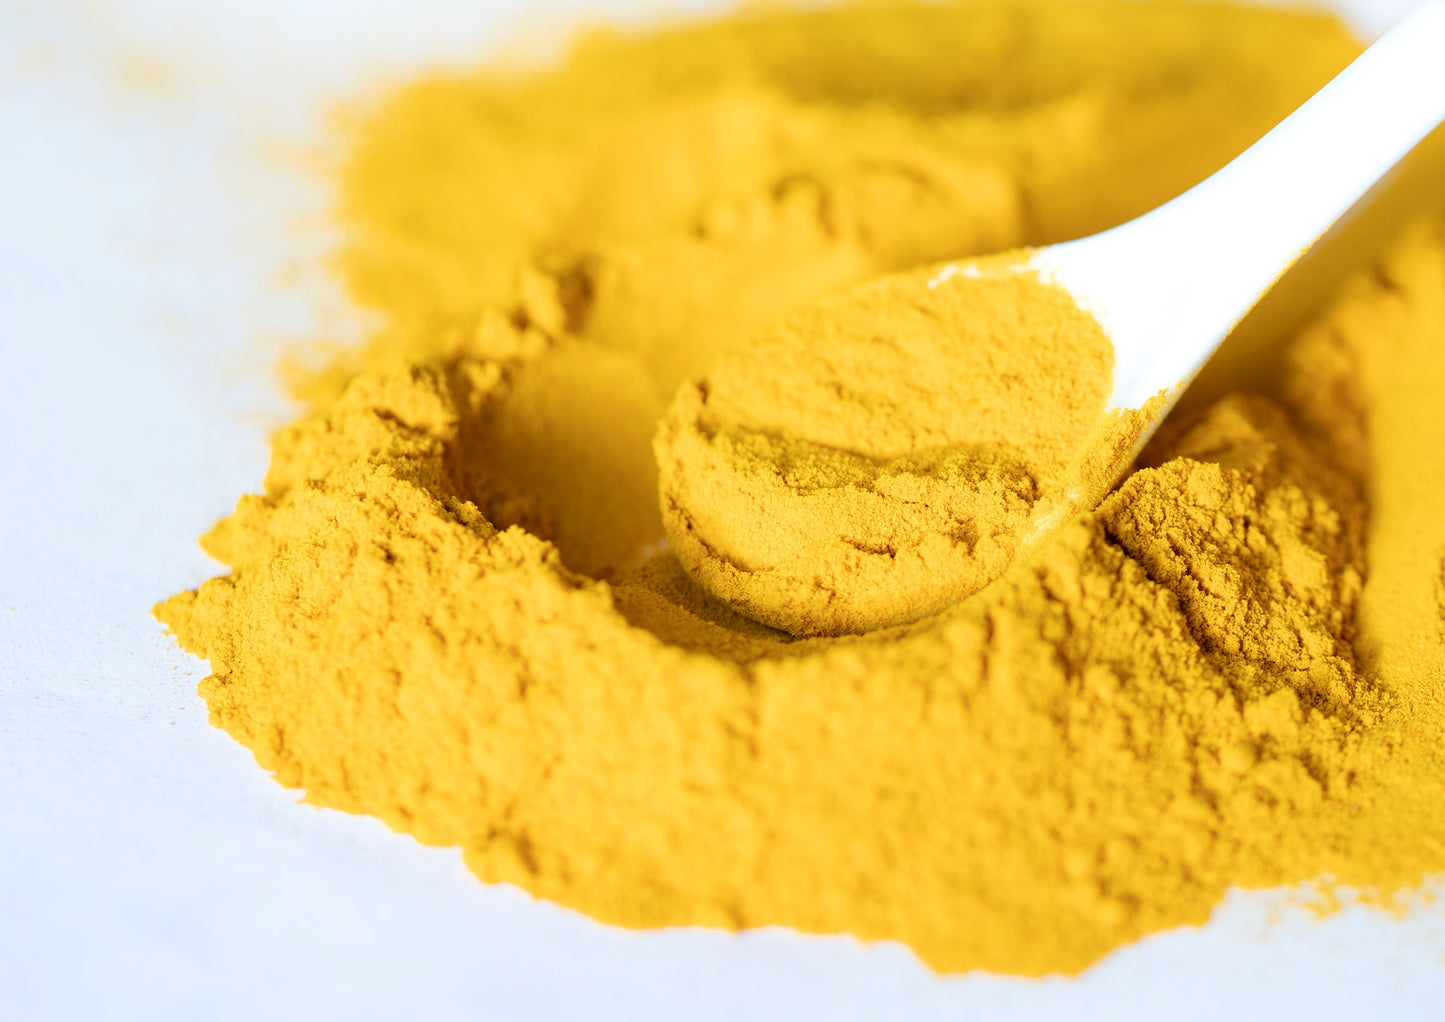 Organic Mango Powder - Non-GMO, Made from Raw Dried Fruit, Unsulfured, Vegan, Bulk, Great for Baking, Juices, Smoothies, Yogurts, and Instant Breakfast Drinks, No Sulphites